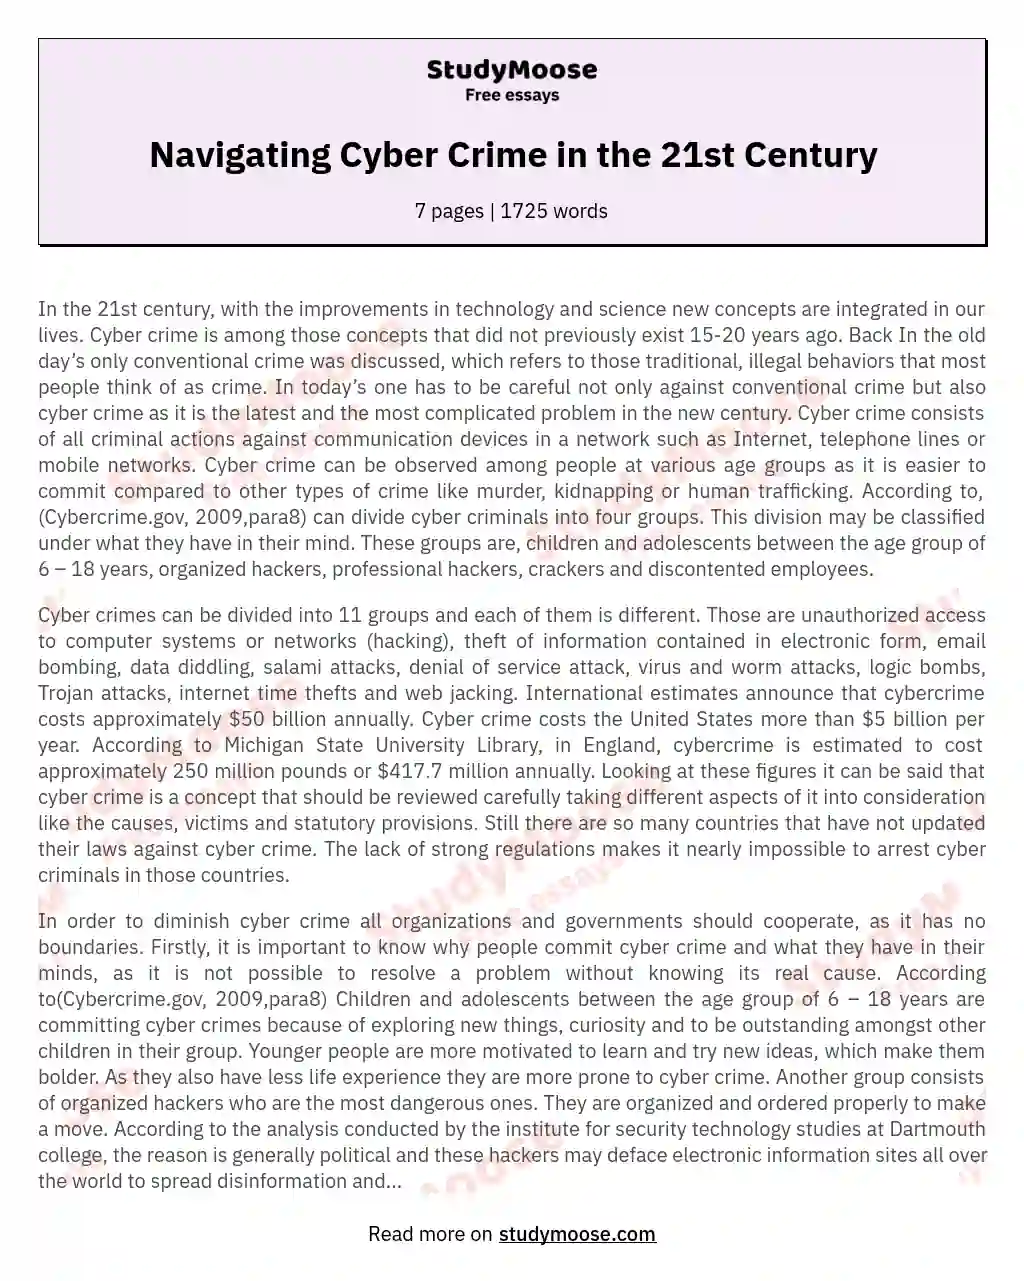 Navigating Cyber Crime in the 21st Century essay